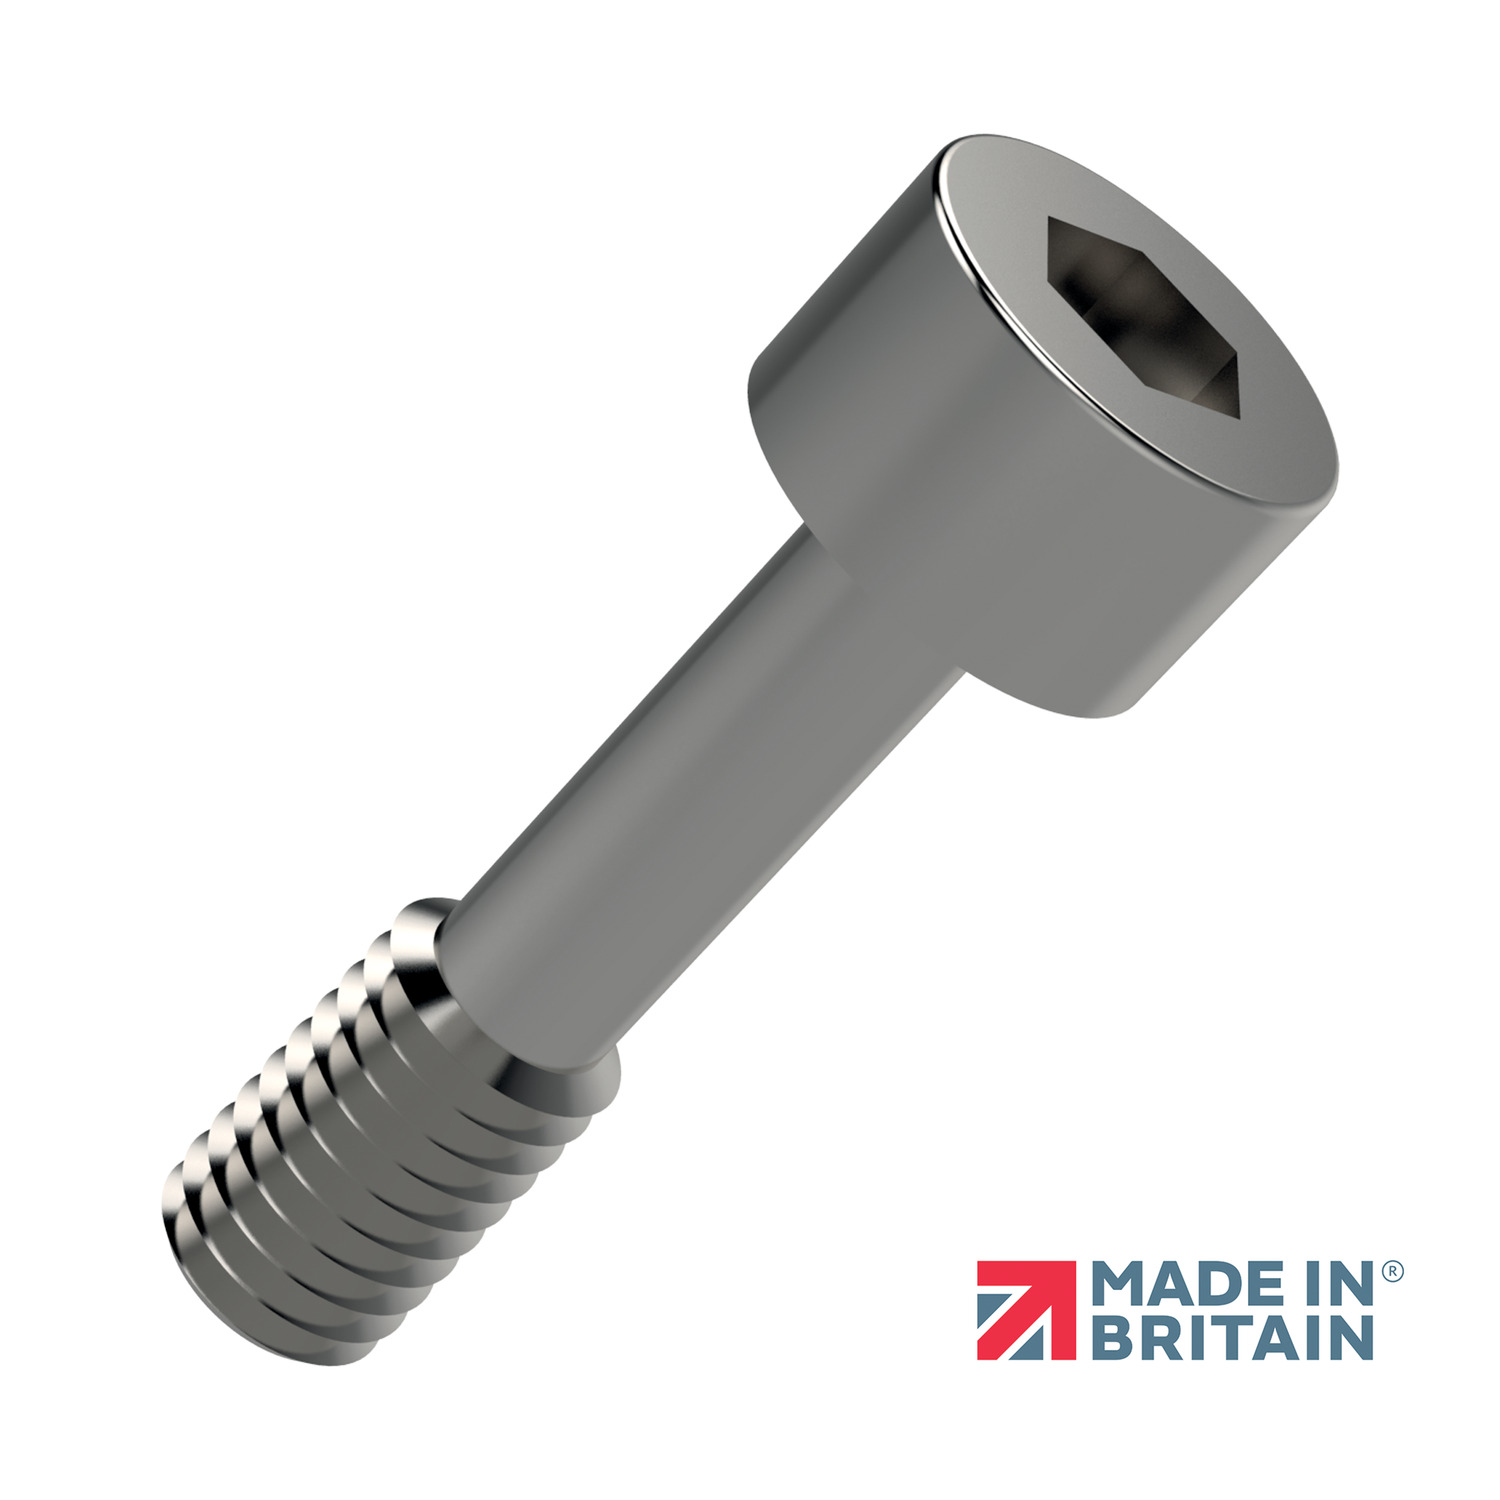 Captive Screws - Cap Head Our standard range of cap head captive screws are manufactured in stainless steel (AISI 303 and 316) with thread sizes M2,5 - M20 and lengths 5 - 80mm. Also in stock in titanium (grades 2 and 5) and zinc-plated steel. Alternative materials, finishes and head types are available.